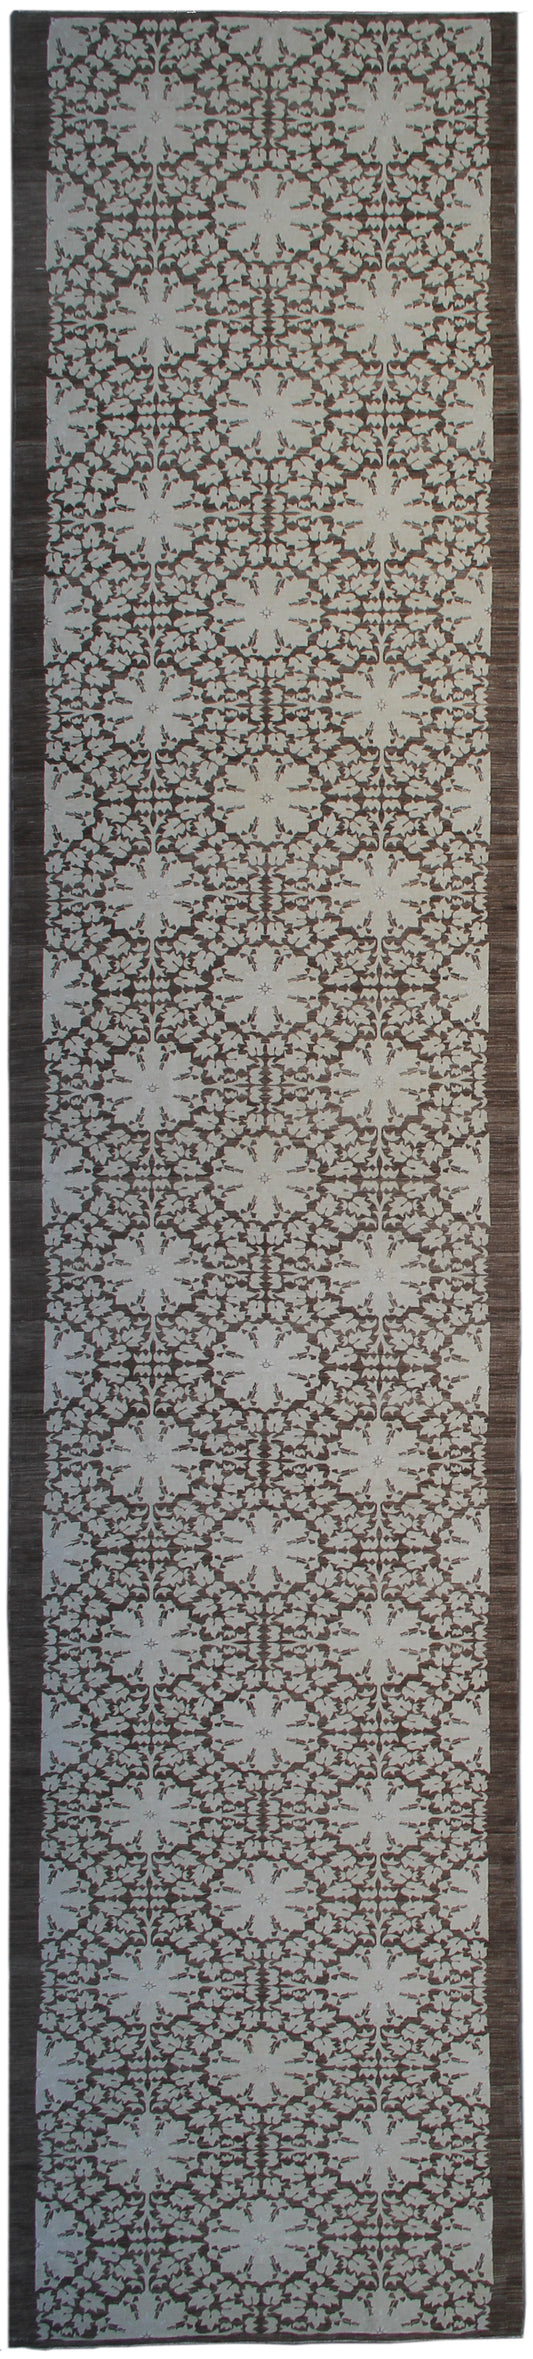 5'x25' Ariana Transitional Long and Wide Runner Rug